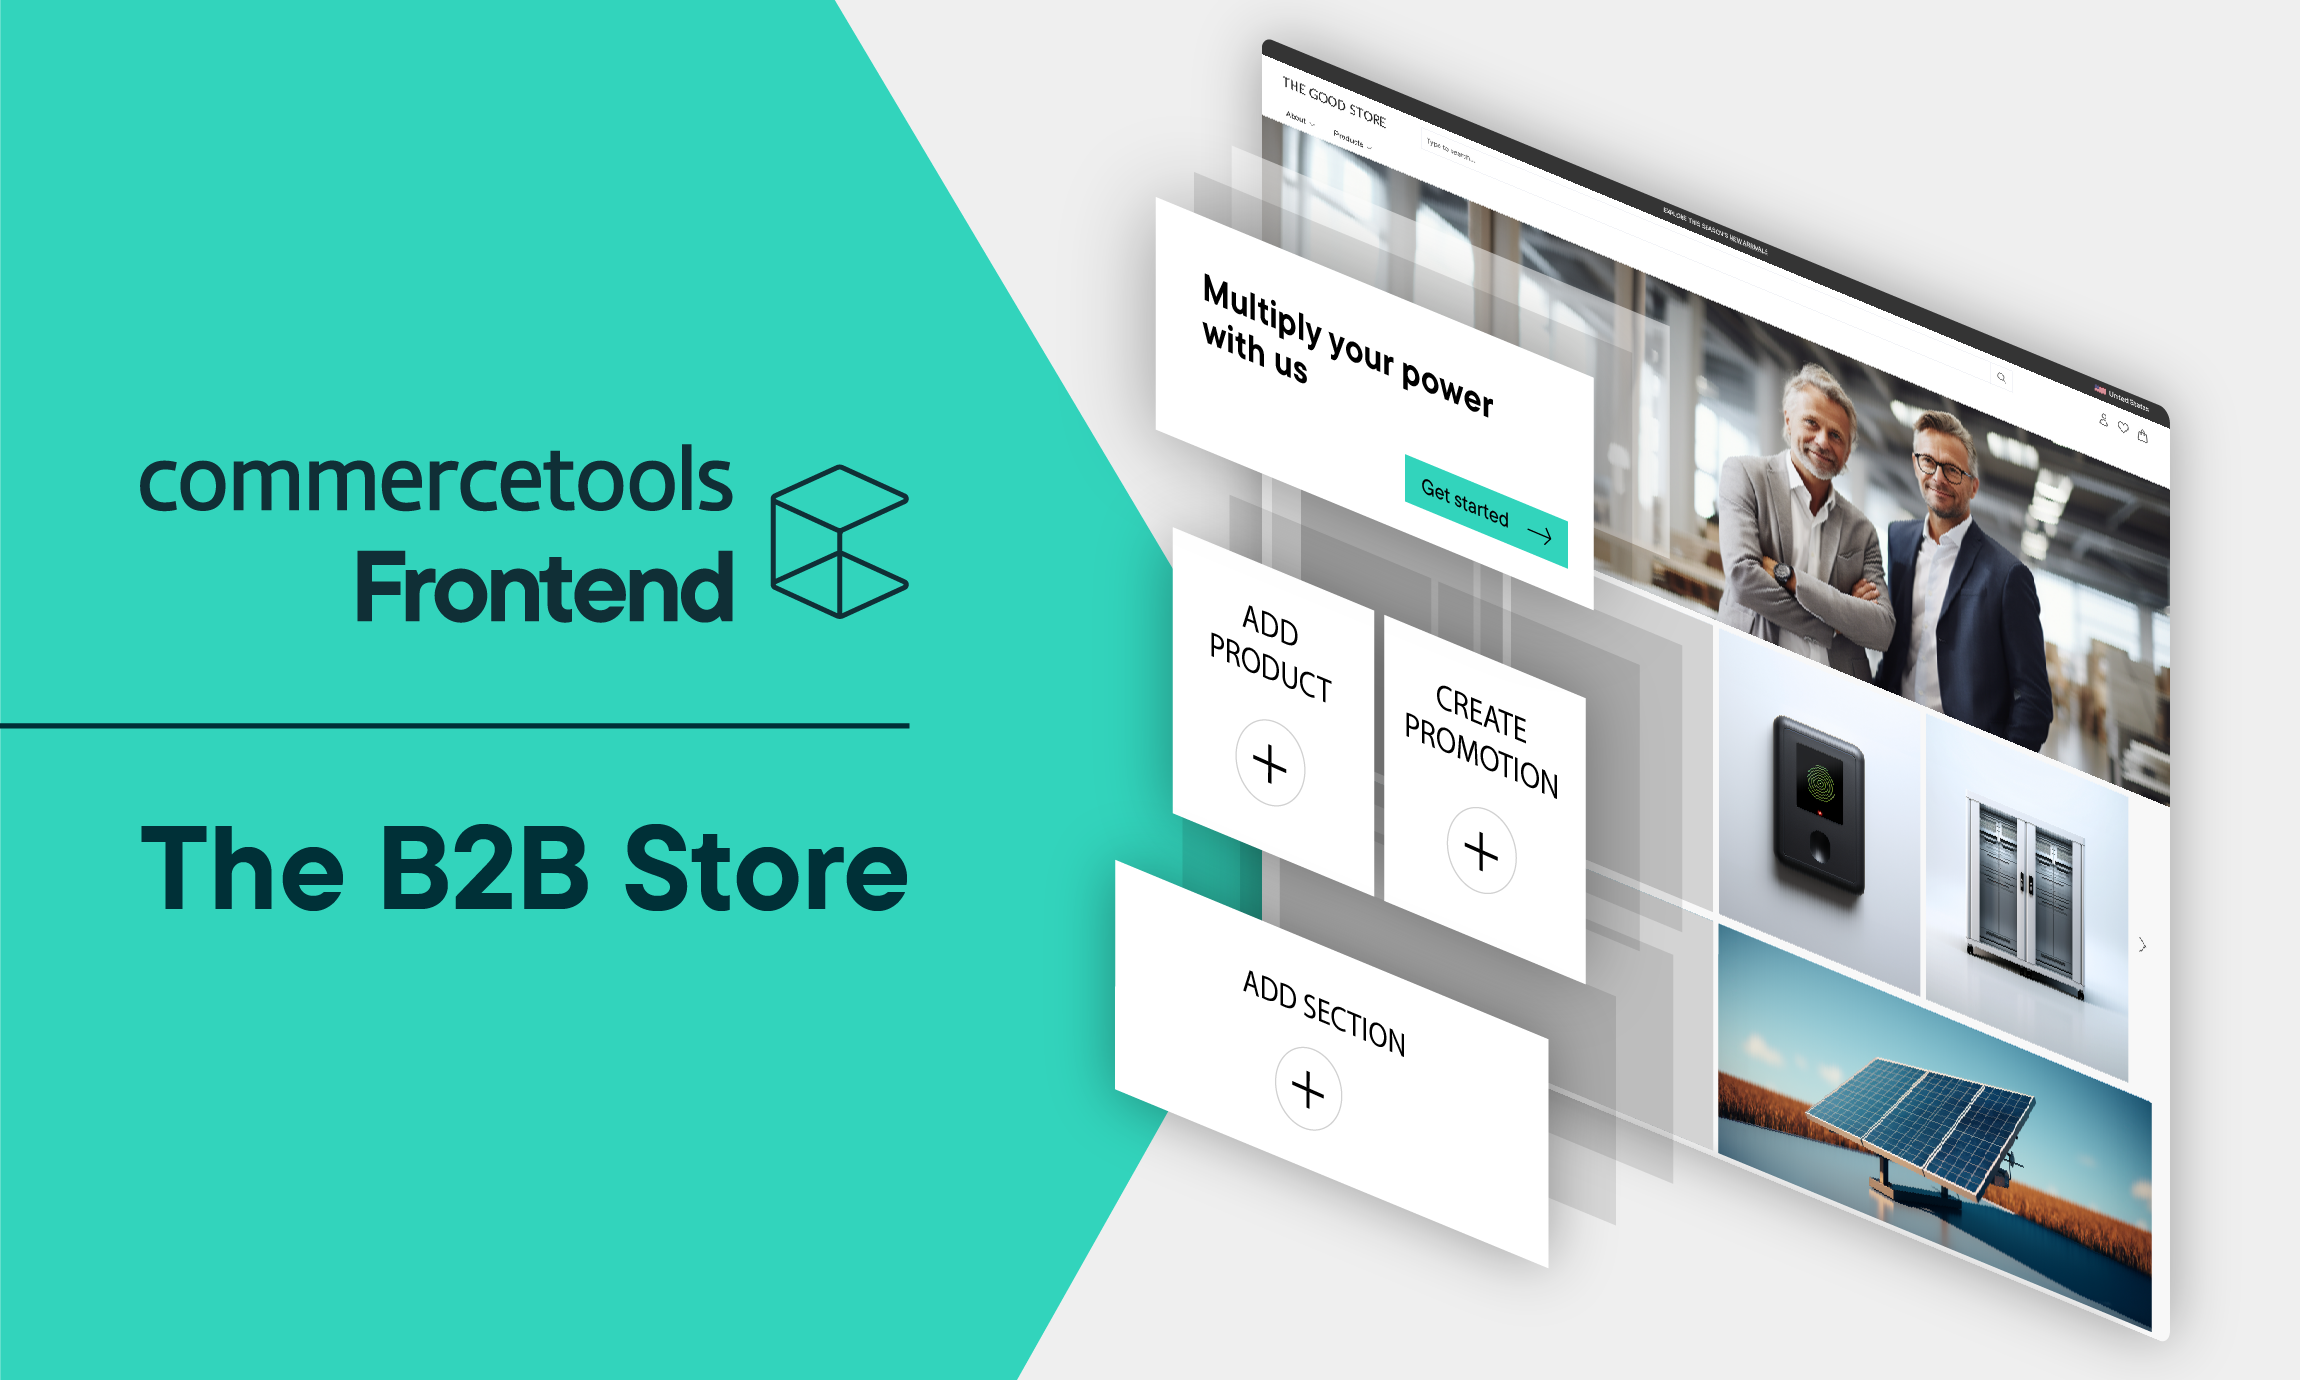 IntroduciThe B2B Store by commercetools Frontend